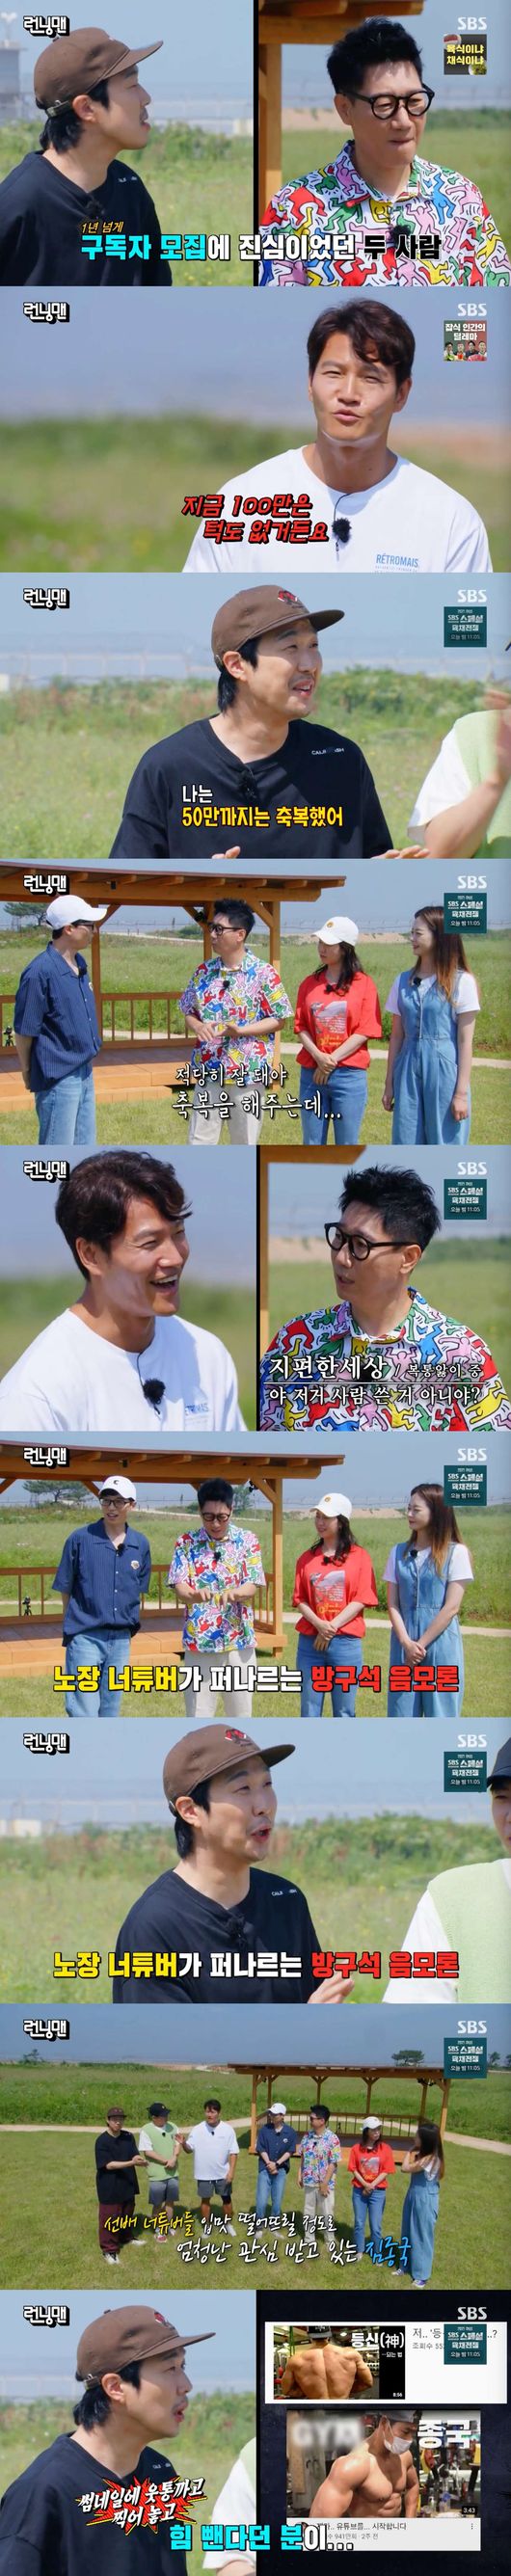 Ji Suk-jin and Haha revealed their Jealousness, with singer Kim Jong-kooks personal YouTube channel breaking the 1 million subscribers in five days.On SBS Running Man, which was broadcasted on the afternoon of the 4th, it was decorated with a new concept talk race Nogari Day that can be done by constantly chatting, and the members who released the behind-the-scenes behind the early days of Running Man were drawn.On this day, Running Man Kim Jong-kook smiled meaningfully at the news that the production team received PPL from Mars.I want to do a personal YouTube shoot on Mars. Kim Jong-kook said, Do you give me a lot, then I want to shoot an exercise YouTube here.Ji Suk-jin and Haha then raised eyebrows.The two have been on YouTube longer than Kim Jong-kook, but have not yet exceeded 1 million subscribers.In fact, Kim Jong-kook recently opened a personal YouTube channel in five days, exceeding 1 million subscribers and collecting topics.Running Man Yoo Jae-Suk said, Ji Suk-jin and Haha have made a lot of efforts to increase their subscribers, but there is no choice of one million, Kim Jong-kook said.In particular, Haha confessed frankly that I blessed up to 500,000, I think its great, but I honestly have no appetite, Im lost weight, and laughed. Haha said, I have to lose my strength.Kim Jong-kook said, You should not be too strong. I take a thumbnail and take out something.Ji Suk-jin also said, I thought it was a good thing to bless properly, but it was so good that I thought, Is not that a person?Since then, Yoo Jae-Suk has explained the opportunity to gather the current members at the time of Running Man planning stage.Yoo Jae-Suk said, In fact, Song Ji-hyo is talking now, but Family has come out to join Running Man.When I came to the Fang-a guest once, I was tired when I started early in the morning with a local shoot.So I told Ji-hyo, Ill be tired, so go get some rest. He said yes. He didnt even start recording.It was the number one candidate among many candidates, he said.Yoo Jae-Suk said of Ji Suk-jin, Normally casting is decided by the production team, but sometimes I ask for opinions. The PD in charge said, How is Seok Jin Lee?I was surprised that there was a brother in the candidate group. However, Yoo Jae-Suk said, Seokjin was careful because I was close.I wanted to say, Is not it recommended by Yoo Jae-Suk? But Is not it funny to say No? I talked as objectively and coolly as possible.I talked about the concerns and the helpful parts. Sejin is good at talking. Funny.I told him that he was melting, and the disadvantage was that he would not be able to endure the situation where he did not come to the spotlight himself because he did a lot of things alone. In the meantime, Song Ji-hyo laughed at the anecdote that Lee Kwang-soo had thought he was hitting him.Song Ji-hyo said, When my brothers gathered in the early days, I was not easy to match because I was a woman. But the lightman called me a few times, Lets see together and Come out.At that time, I thought that I was misunderstood because I was so annoyed that I did not call and I stopped calling, but I did not call from then on. So, while moving to the town hall, the second mission site, Running Man Yoo Jae-Suk called Lee Kwang-soo and said, Im in the main house now.Im just asleep at home, he said to Lee Kwang-soo, I do not think youre doing anything on Monday, but if you are going to do this, just record it. Haha also added, Youre going to be here because you record it tomorrow.In addition, Lee Kwang-soo said, Do not appear, but watch us from a distance. Why do not you appear at a distance?I was pleased to see the viewers by tilting my head.On the other hand, SBS Running Man is an entertainment program that focuses on laughing with many stars and members performing missions together and broadcasts every Sunday at 5 pm.SBS Running Man